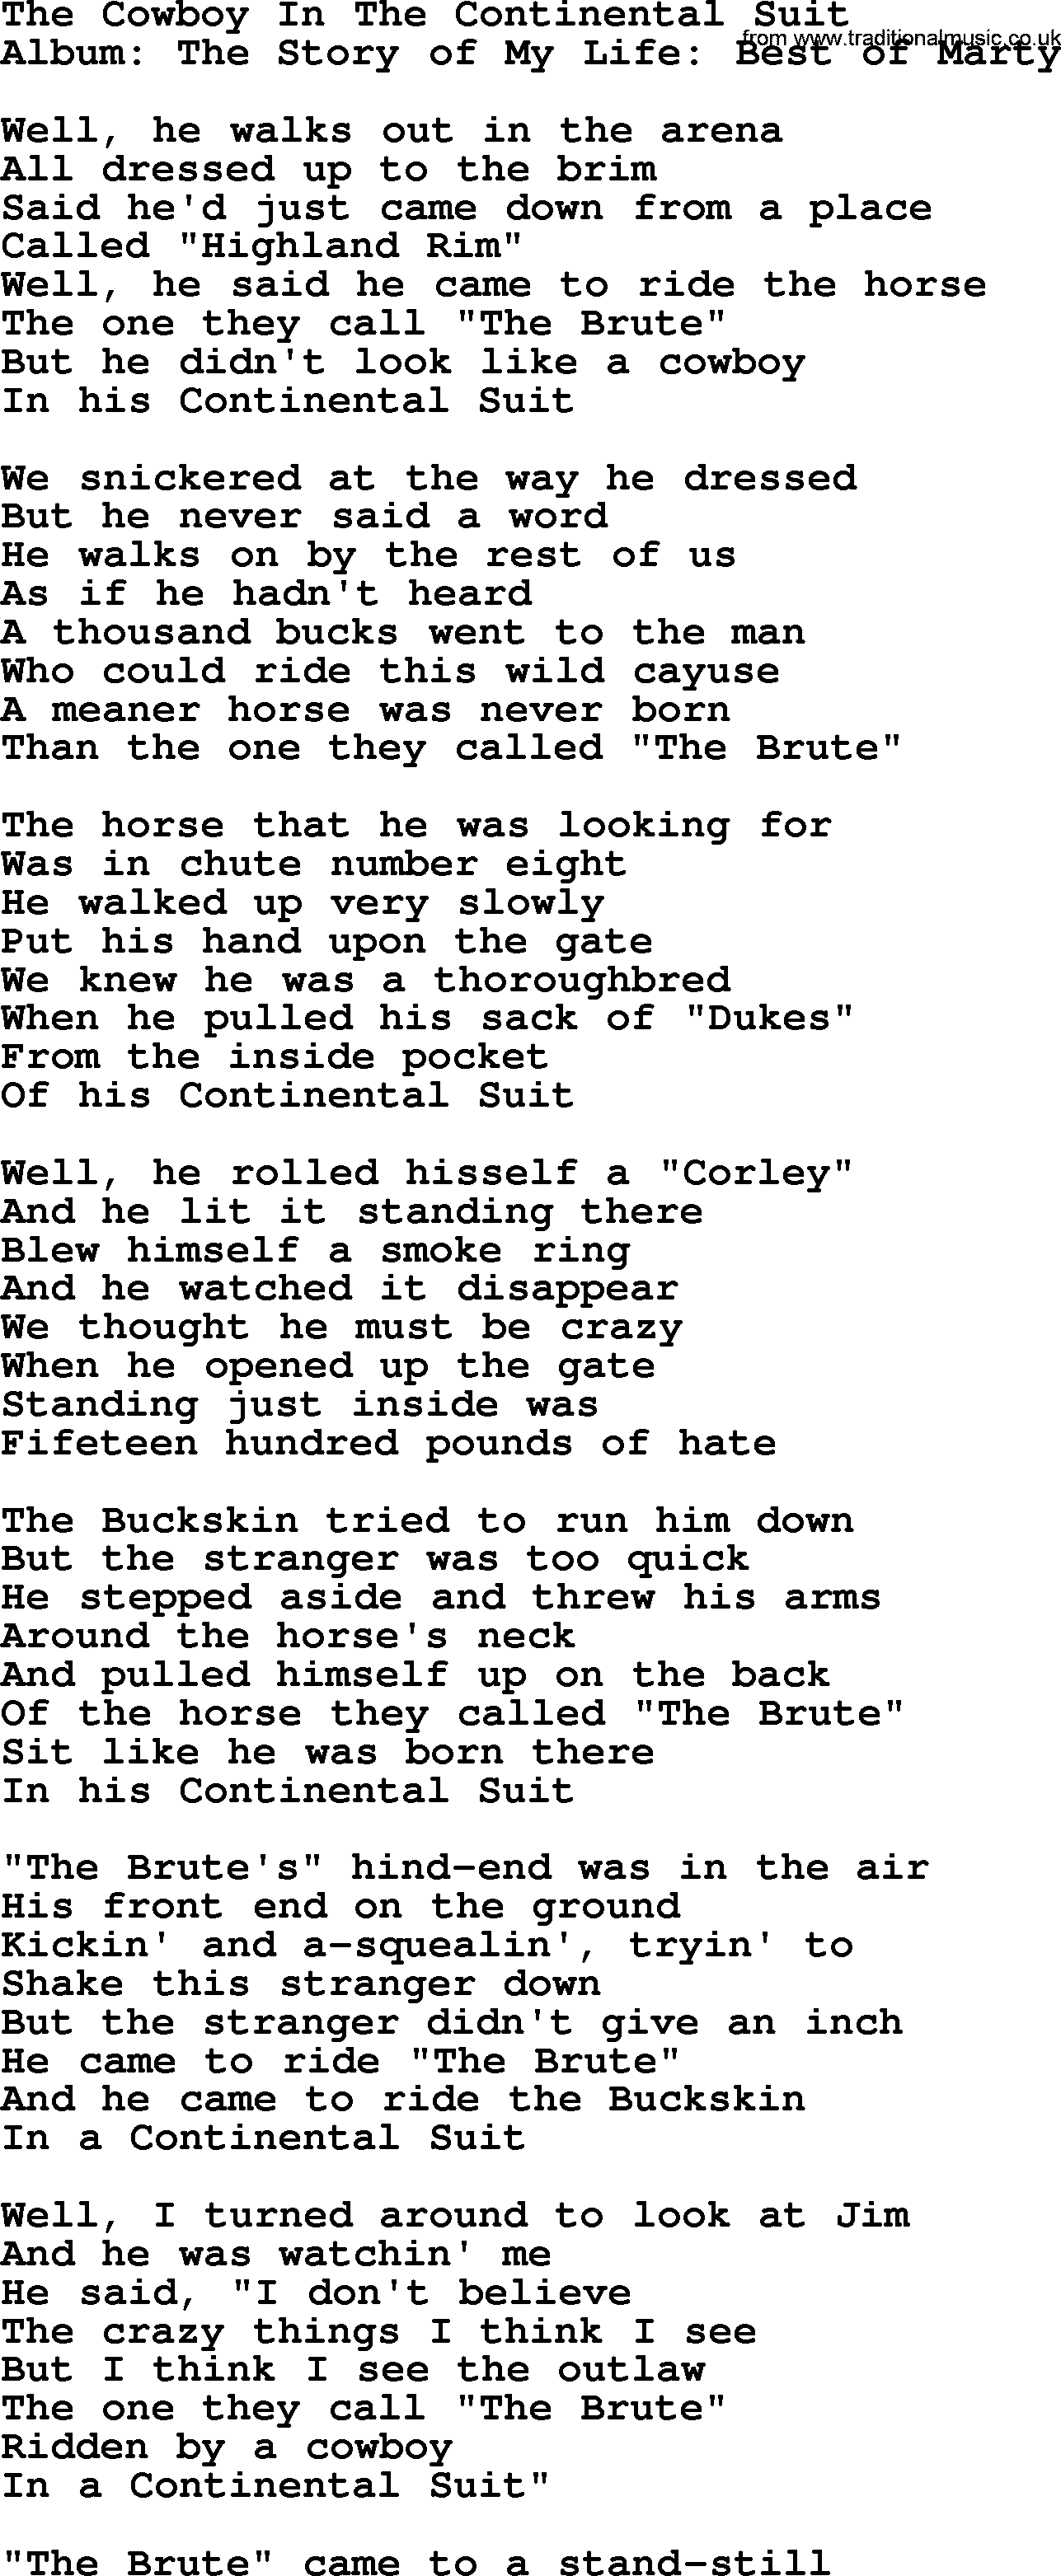 Marty Robbins song: The Cowboy In The Continental Suit, lyrics